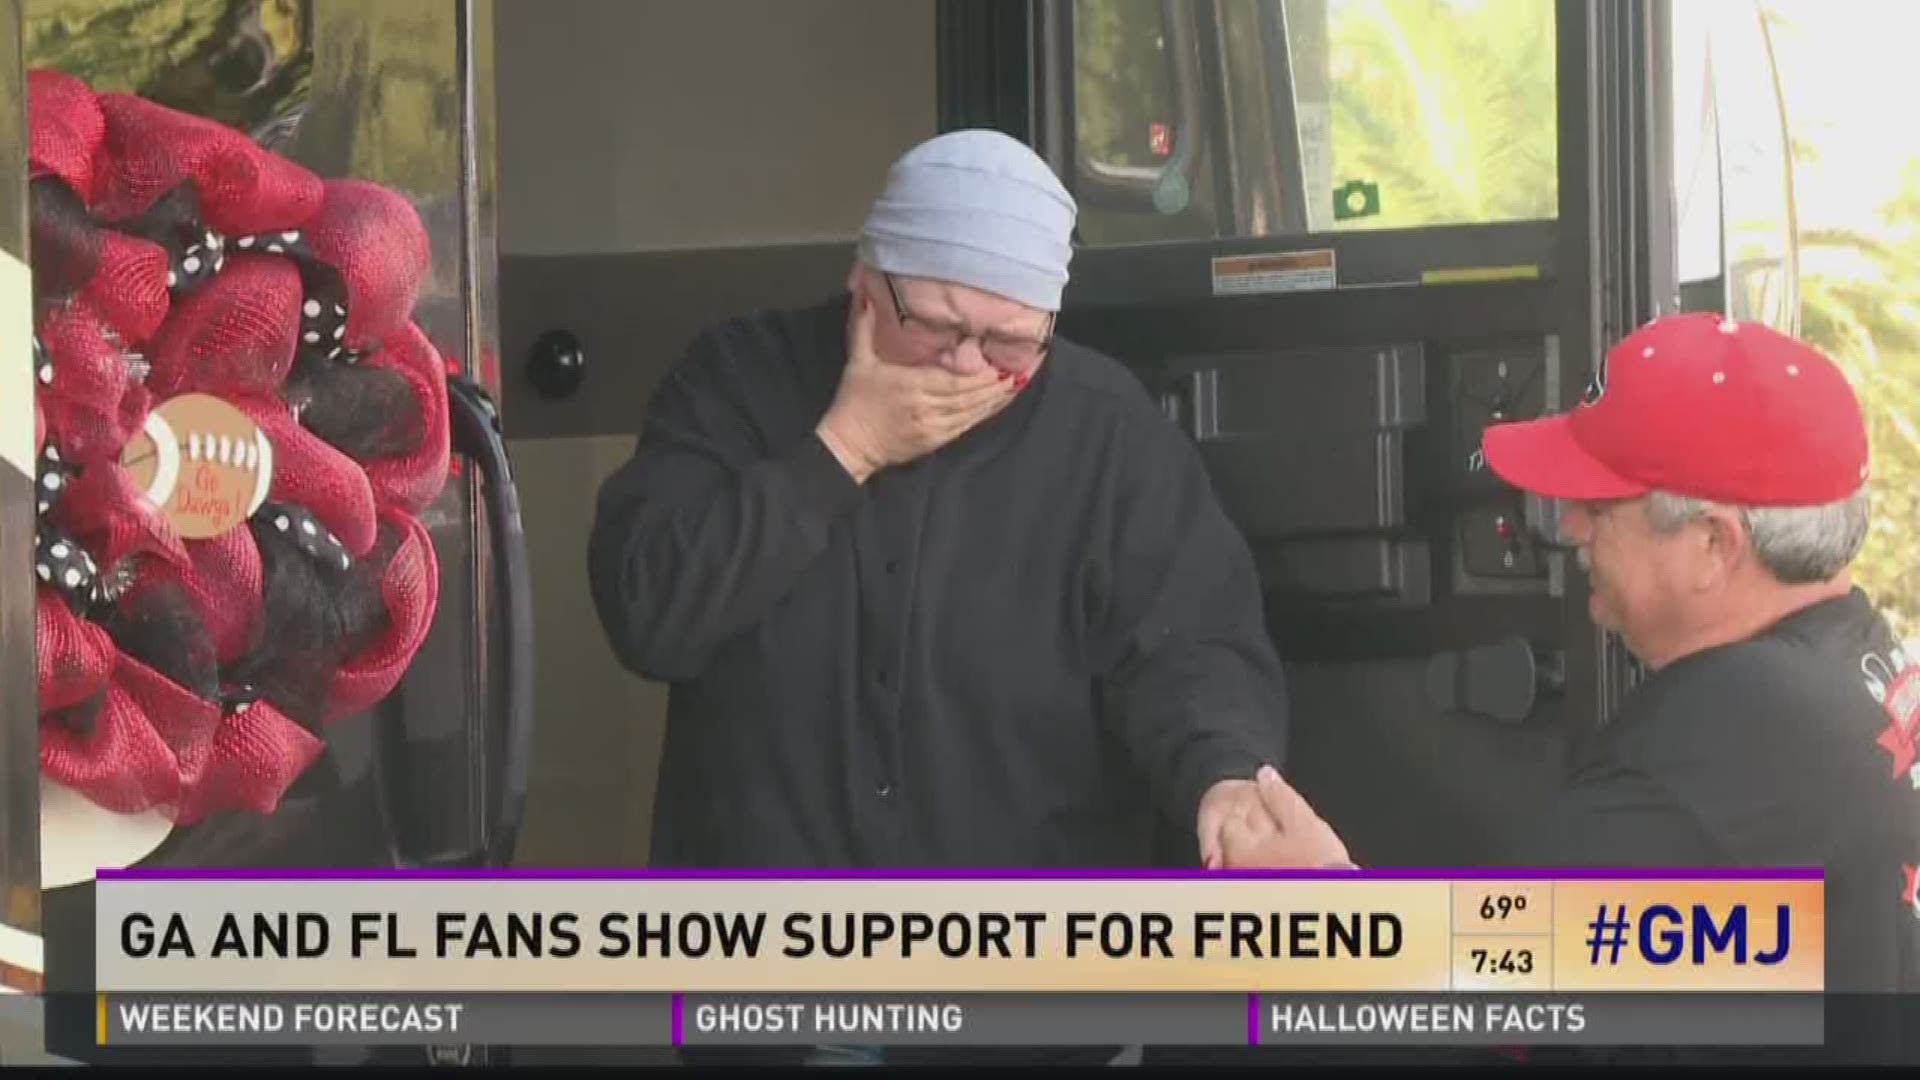 GA and FL fans show support for friend